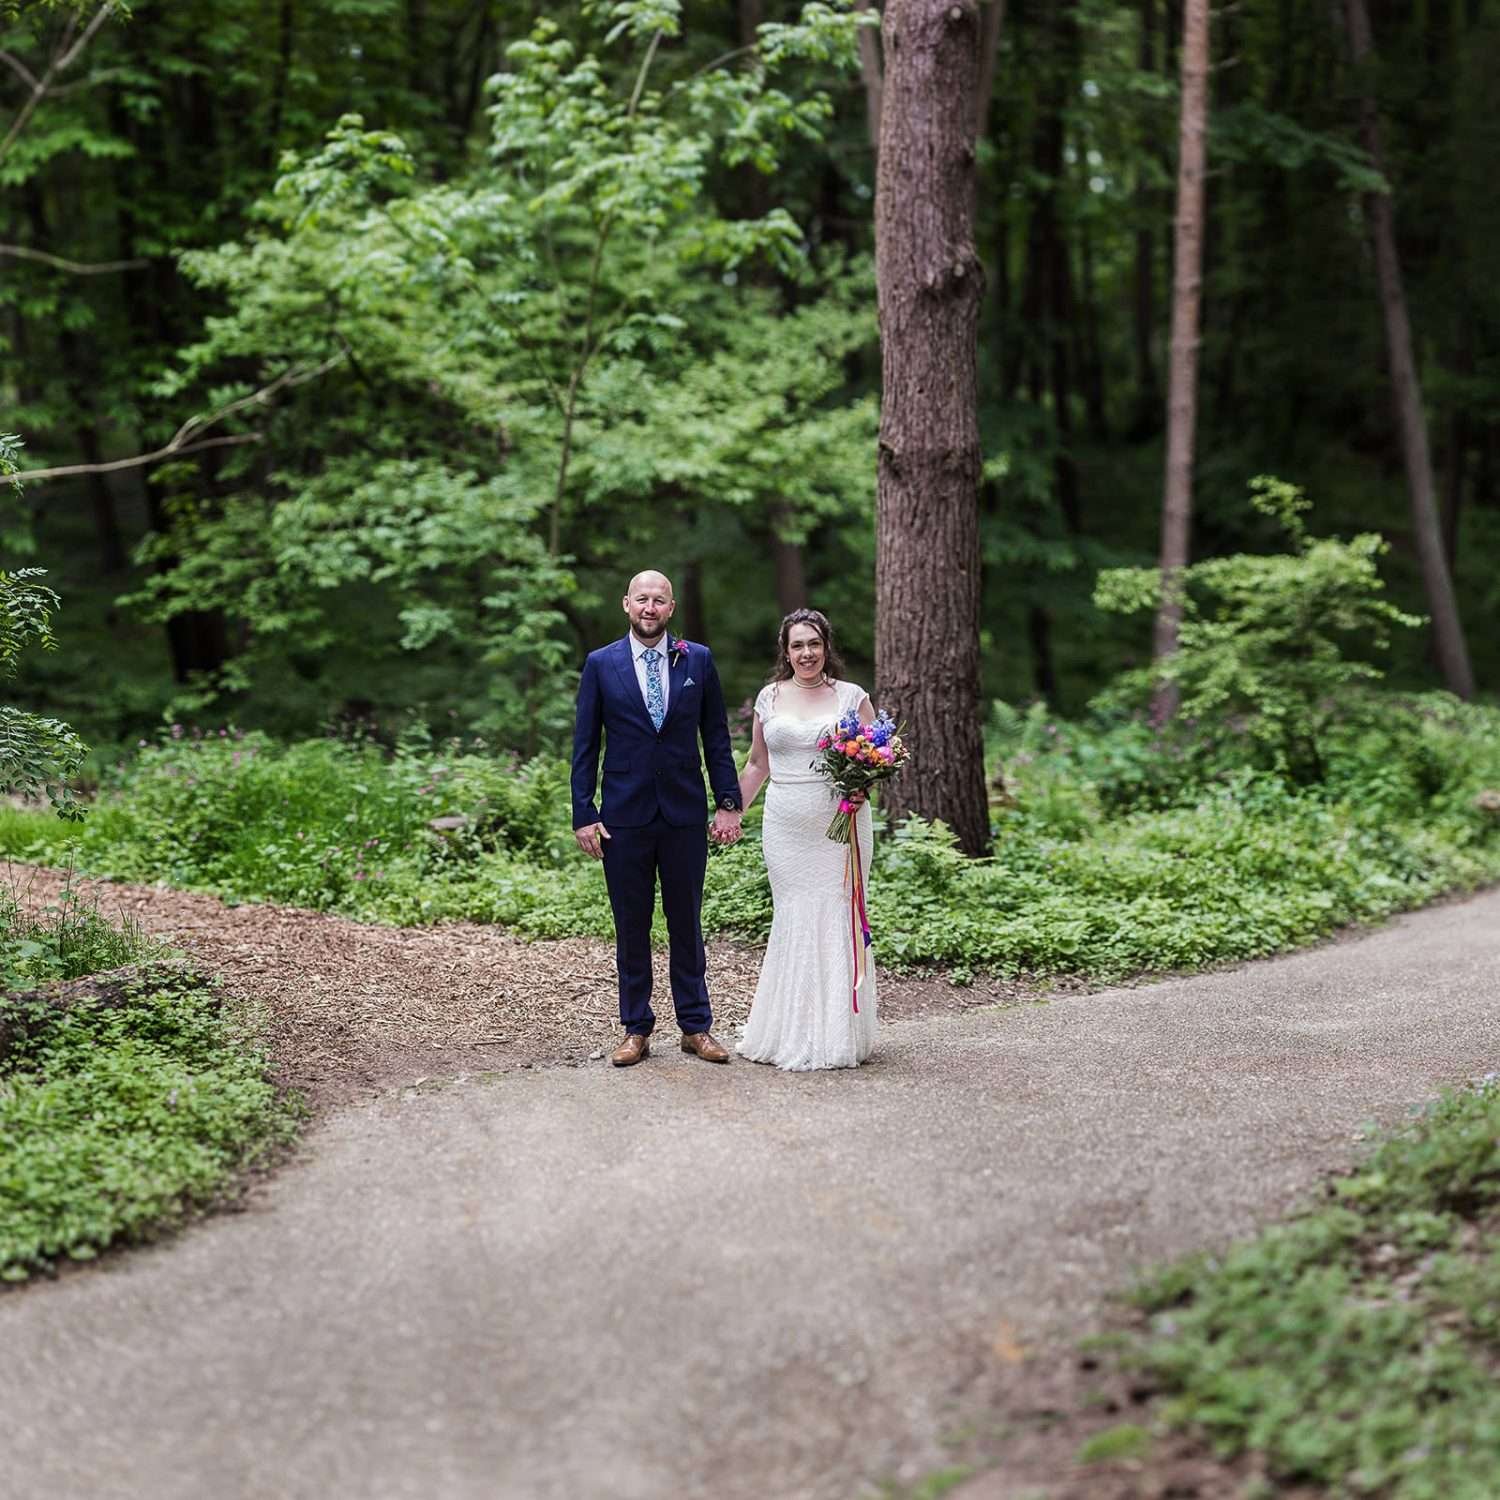 A Brenizer style portrait of a happy Bride and Groom holding hands after their wedding ceremony  in the beautiful Spring woodland landscape of Greenacres Colney Norfolk
